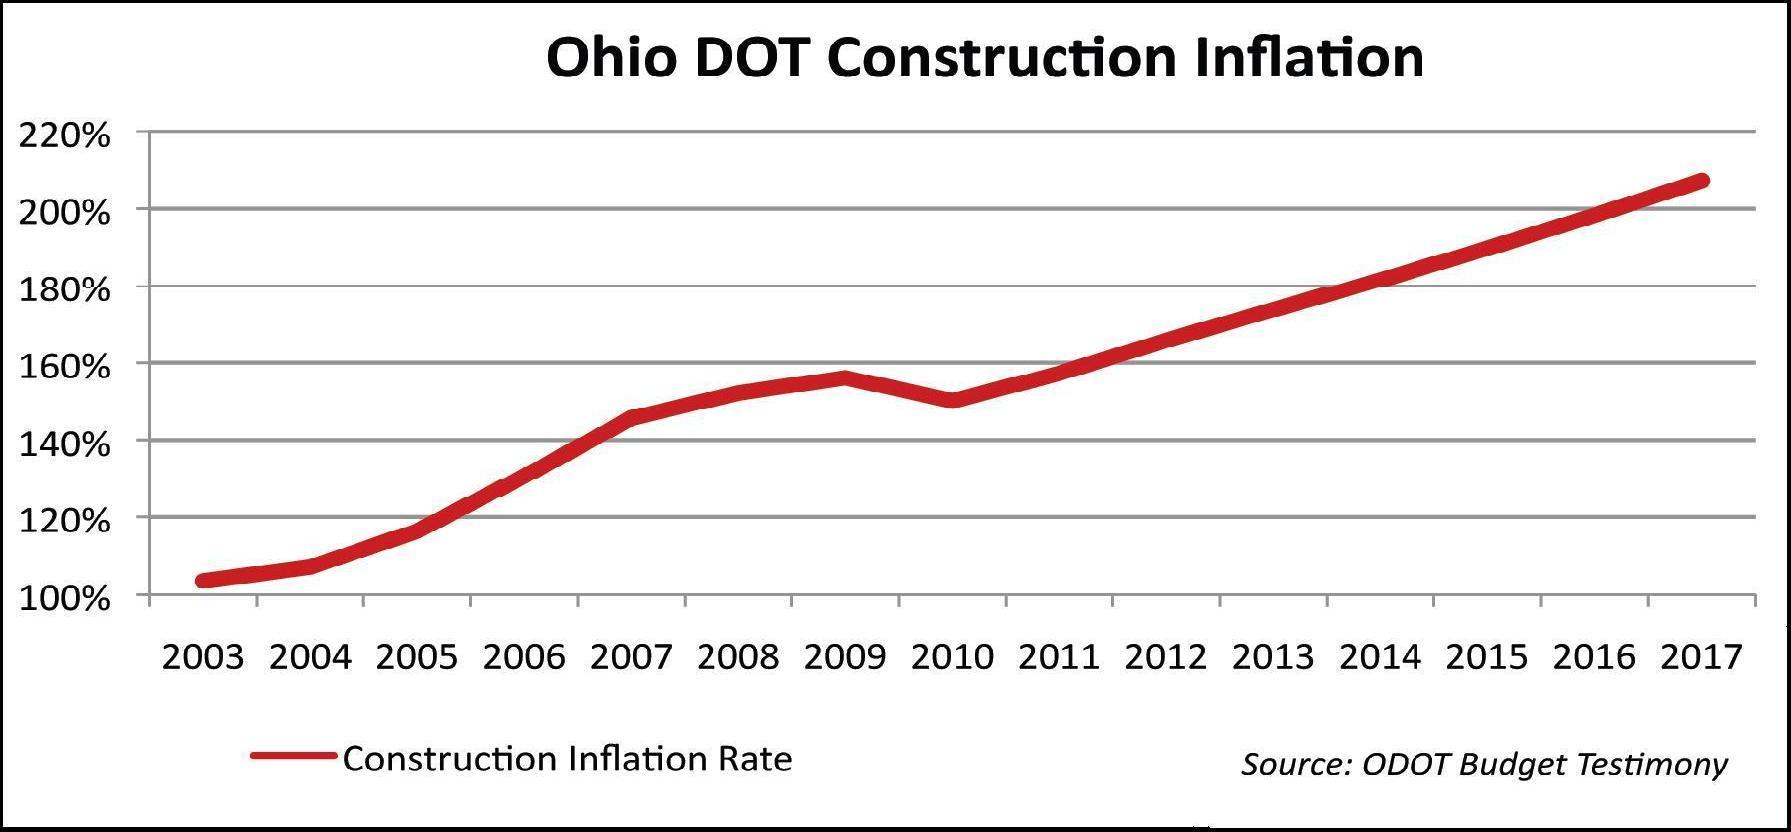 Figure 20 is a line chart illustrating the construction inflation rate experienced by the Ohio Department of Transportation from 2003 through 2011 and projected to 2017.  It illustrates that between 2003 and 2009, inflation rose by 60 percent. Construction inflation declined somewhat in 2010 and is projected to steadily climb again through 2017.  By 2017, the rate is projected to have increased by 200 percent compared to the base year of 2003.